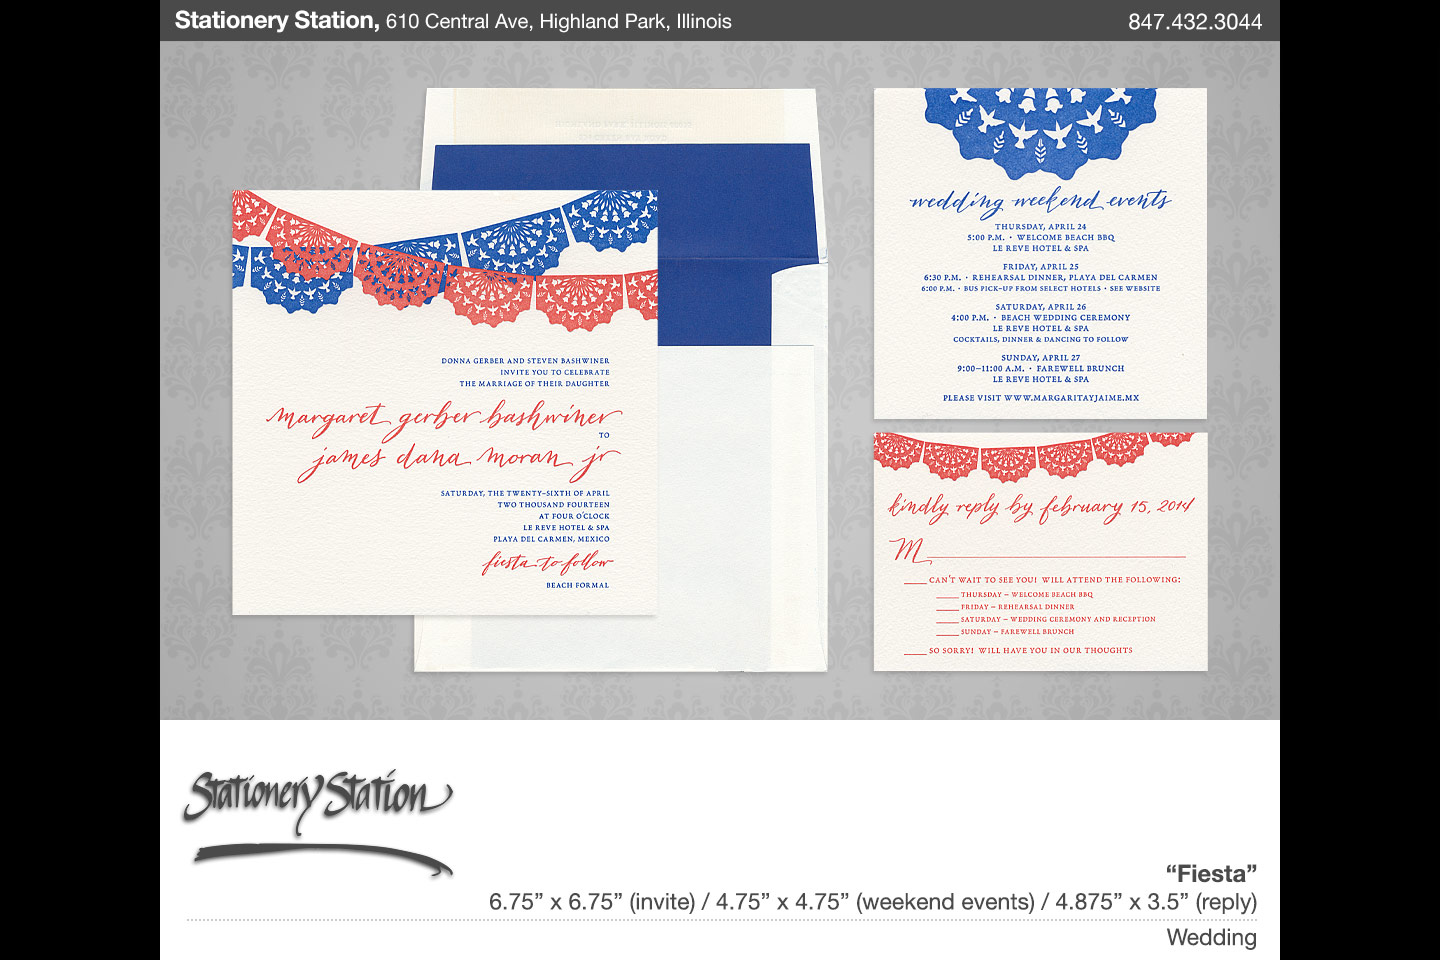 a sample stationery station enlargement of a wedding invitation suite called Fiesta, scanned and digitally arranged by 4d, inc